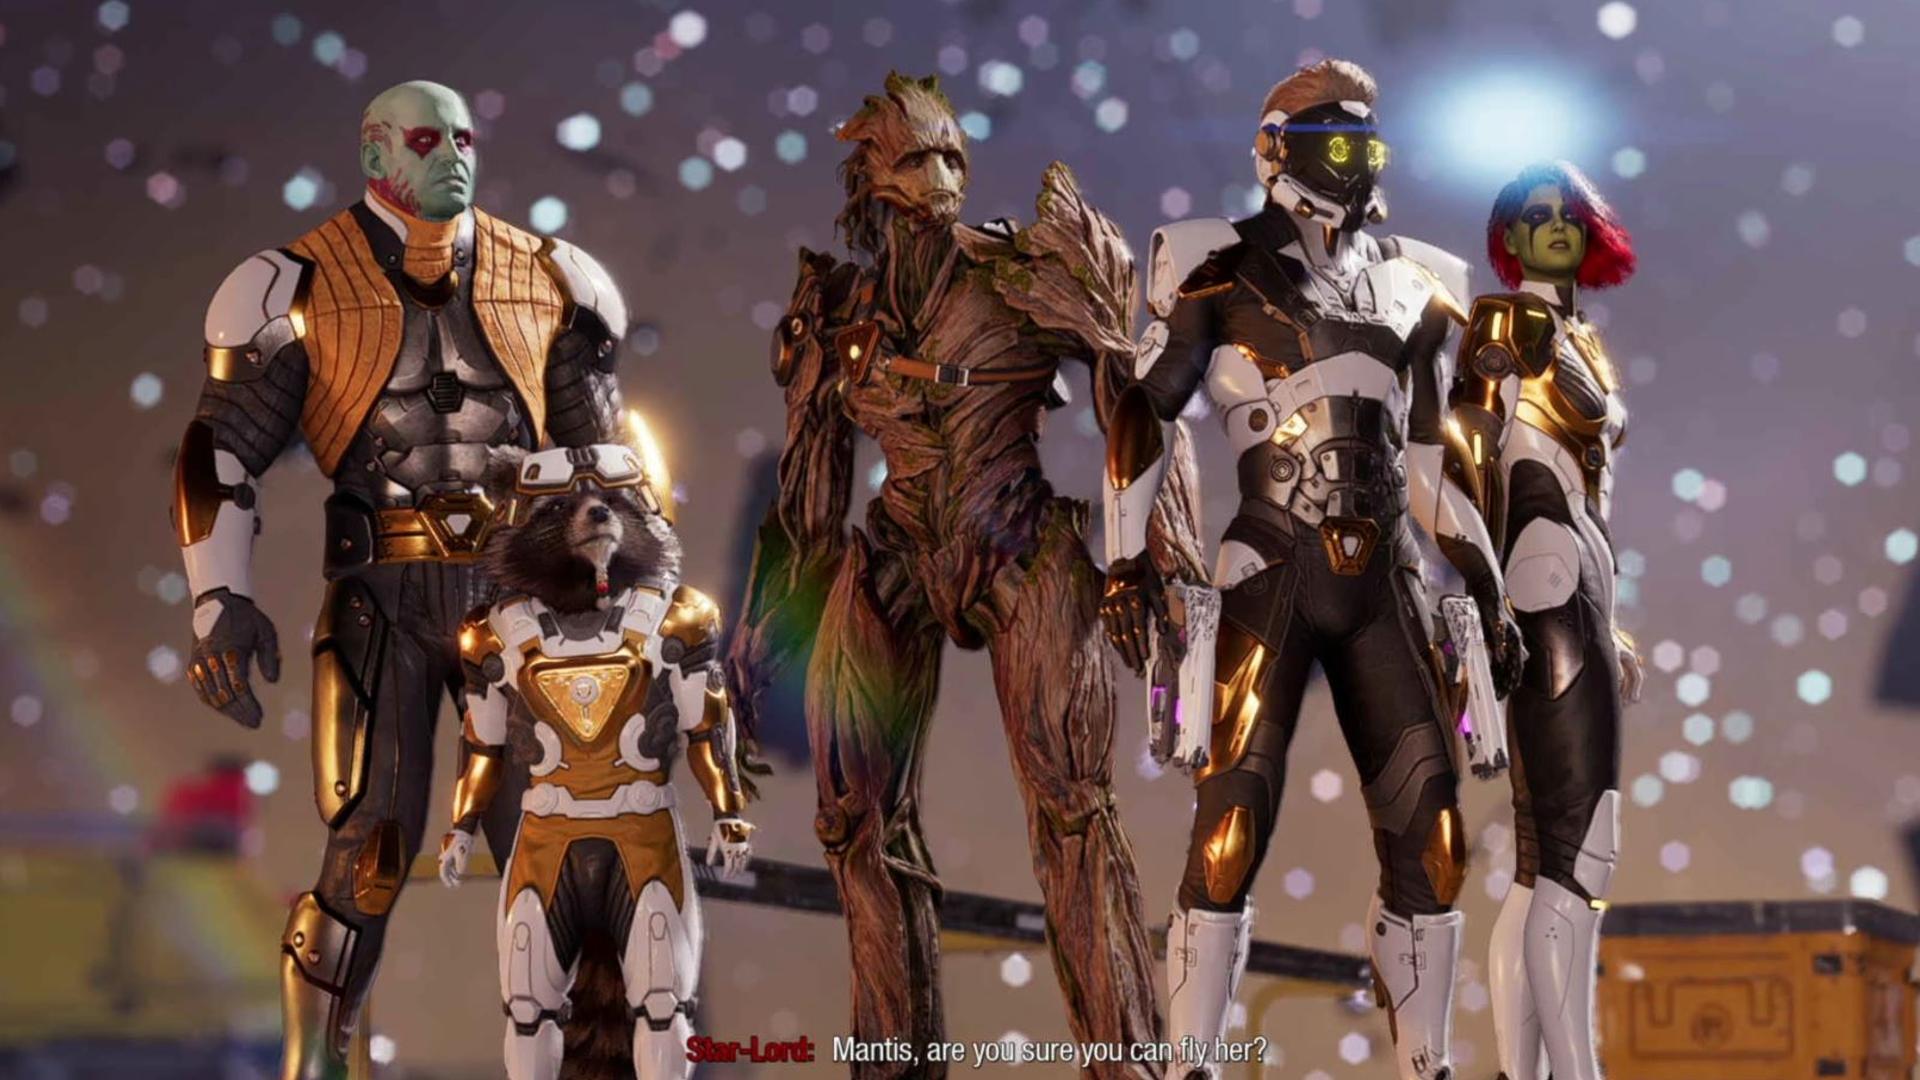 Guardians of the Galaxy outfit locations: All the guardians can be seen standing in their gold outfits.